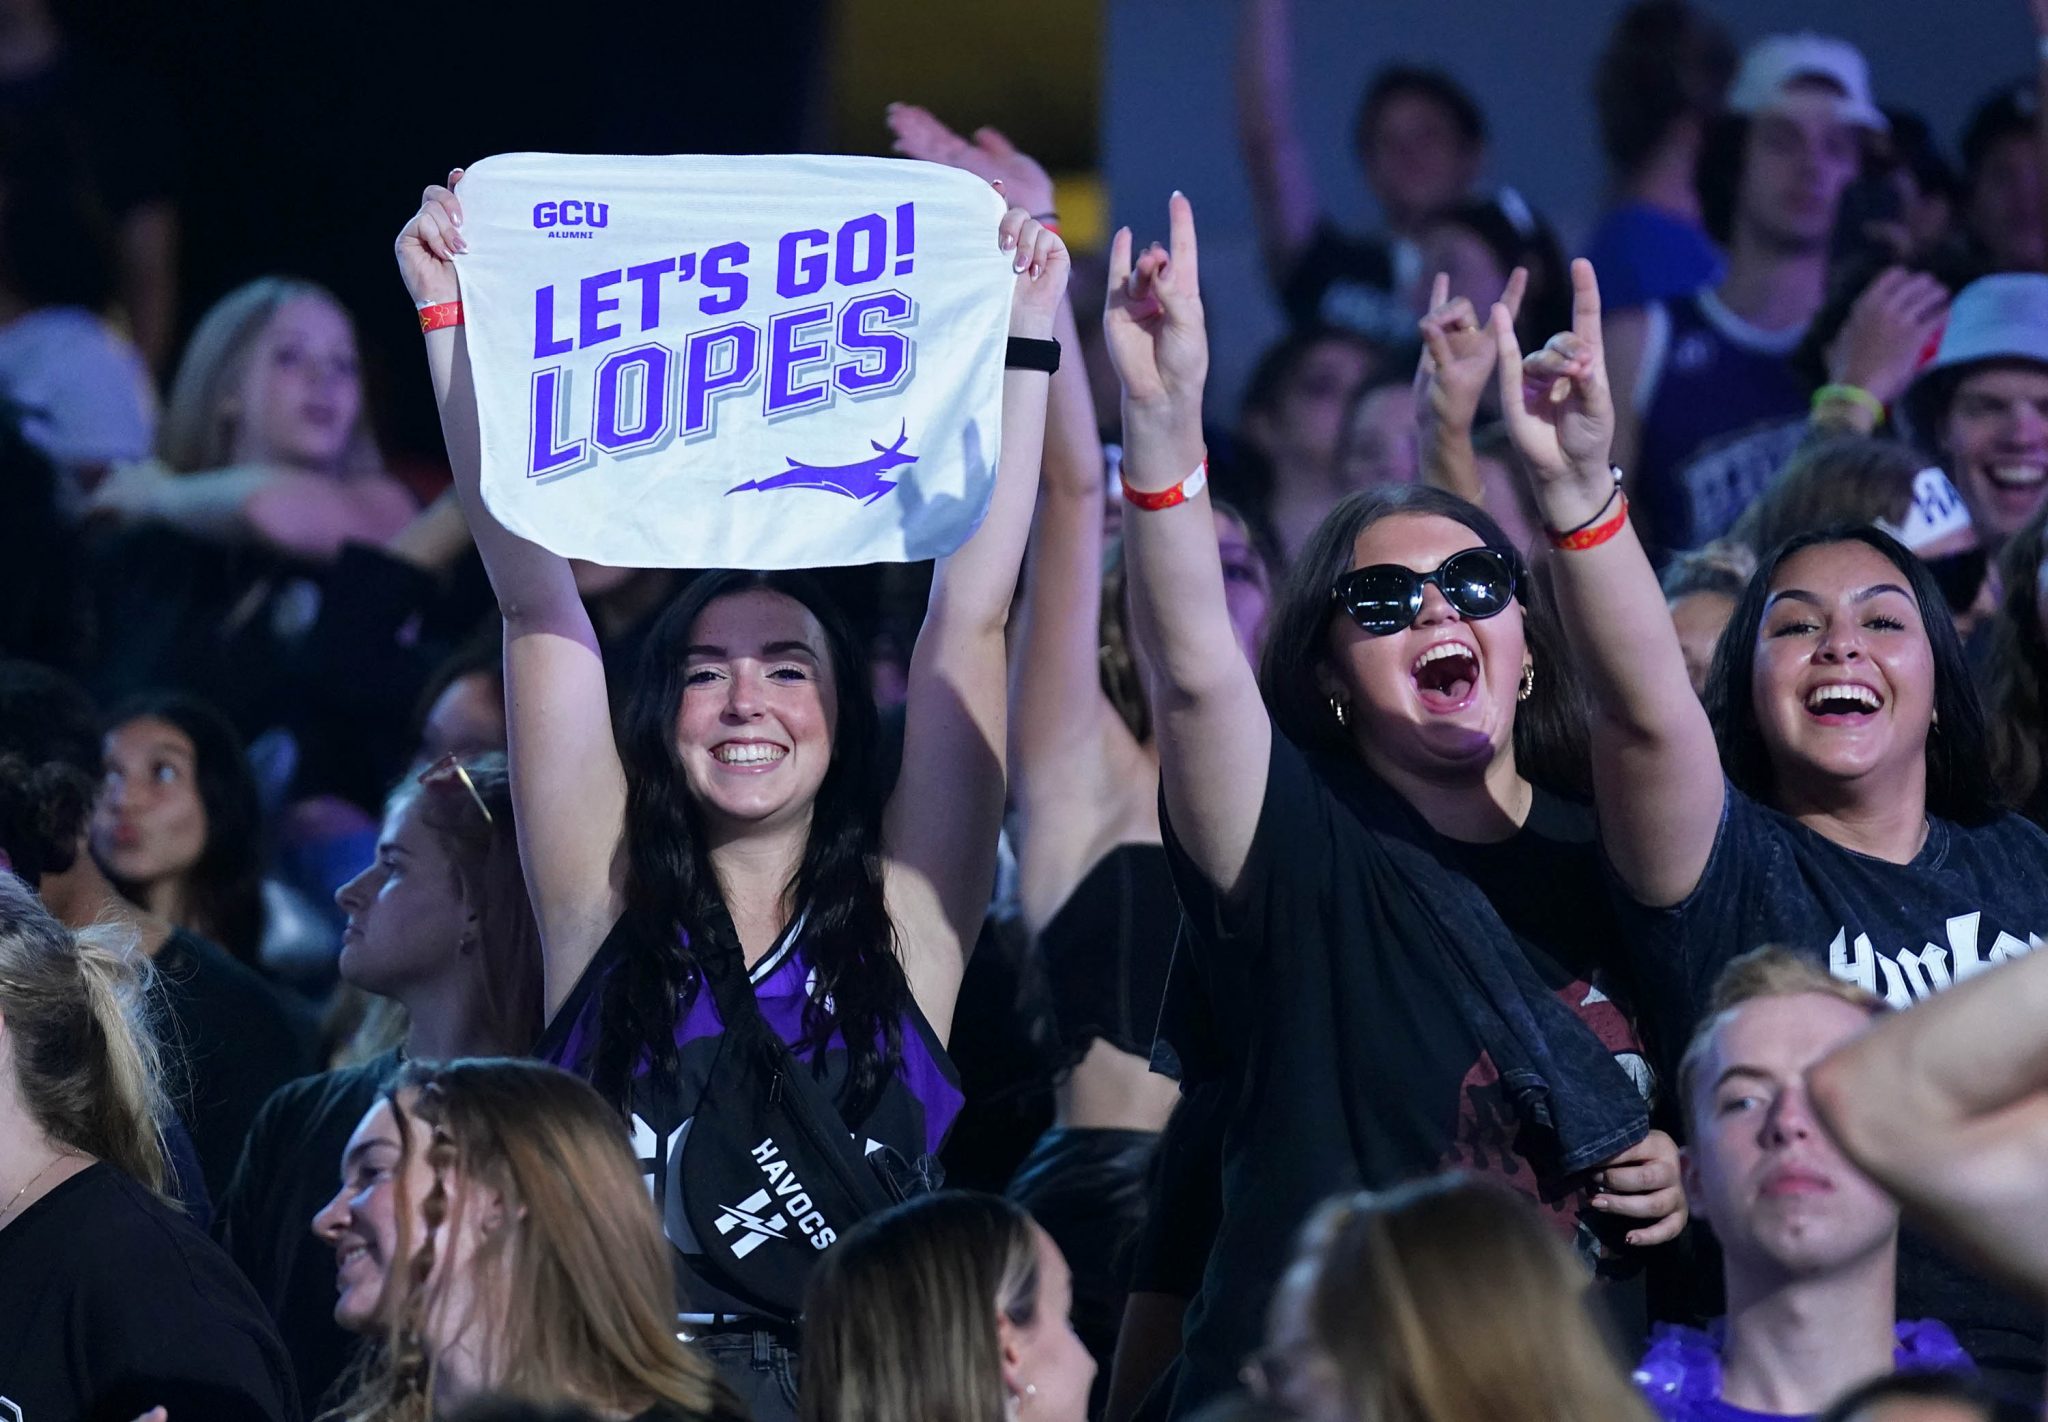 They built this Arena on rock 'n' roll and Midnight Madness GCU News